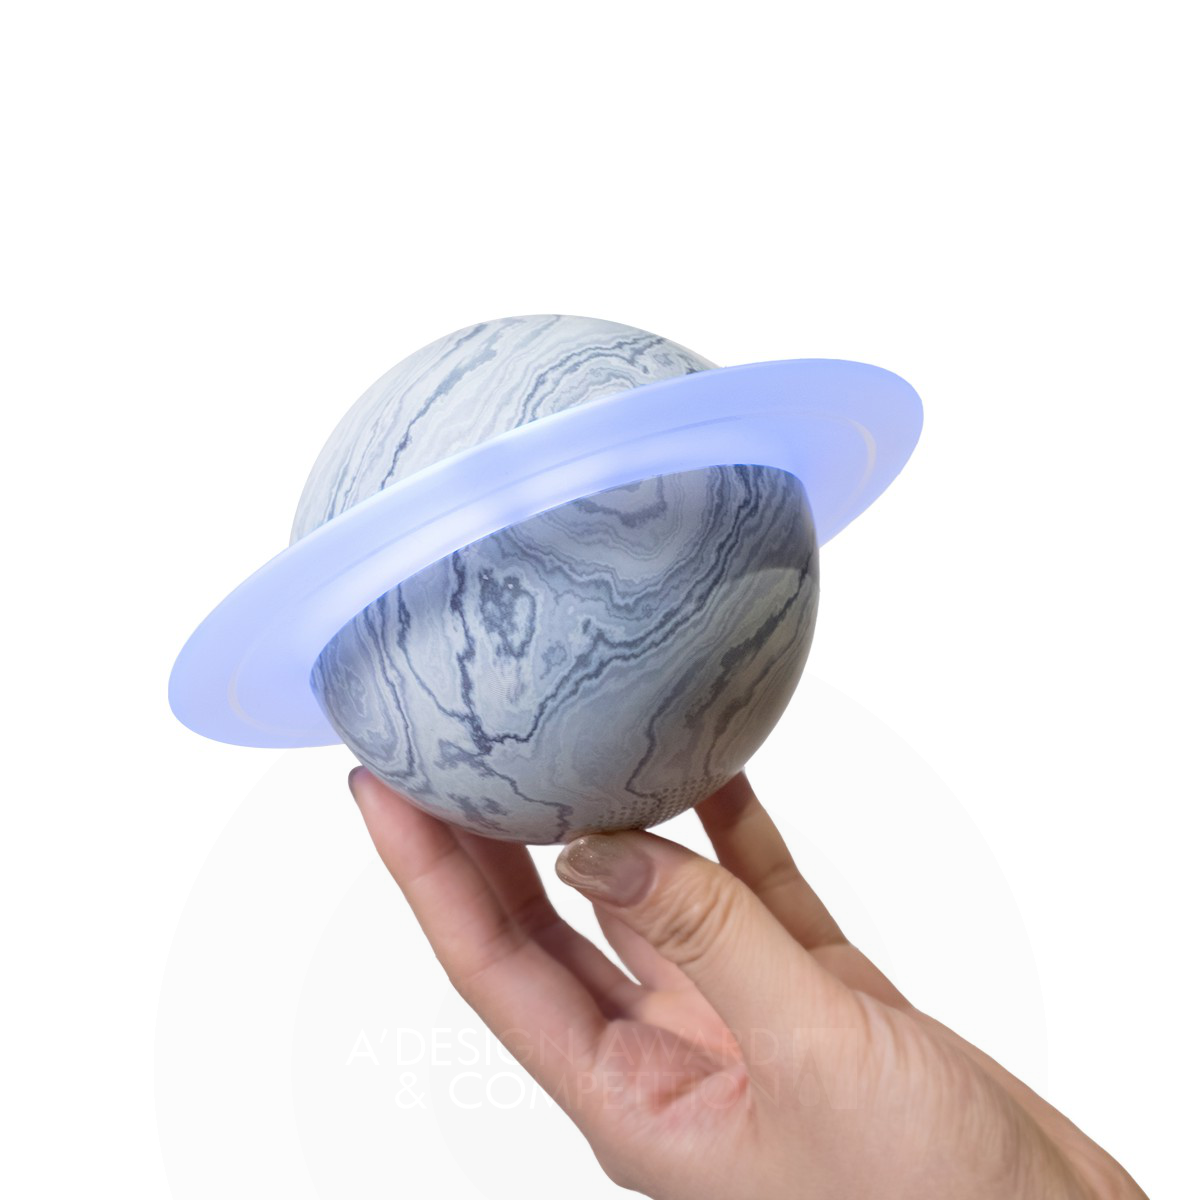 Planet Bluetooth Speaker by Pang Ming